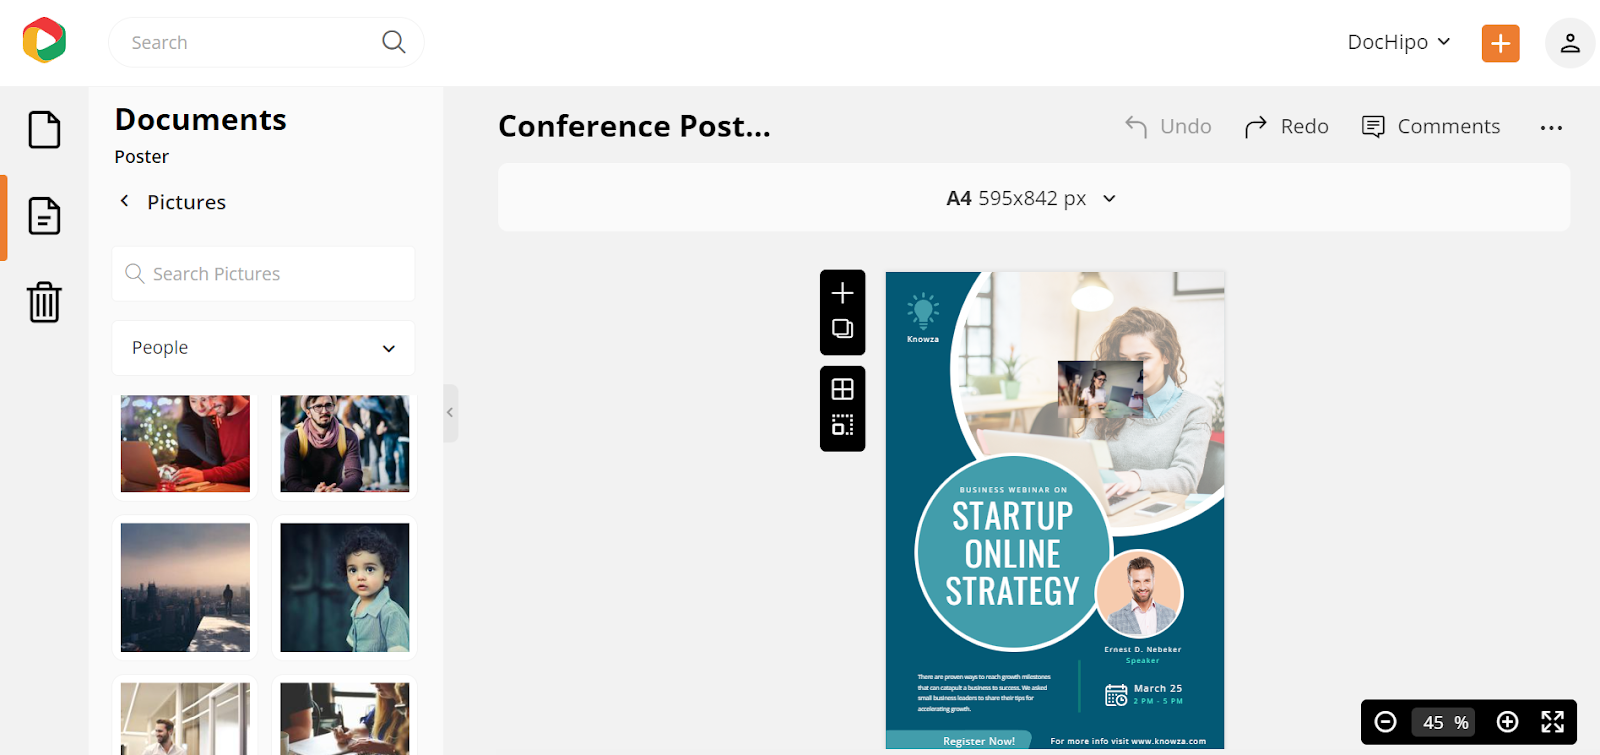 Replace the existing image in the DocHipo Conference Poster Template